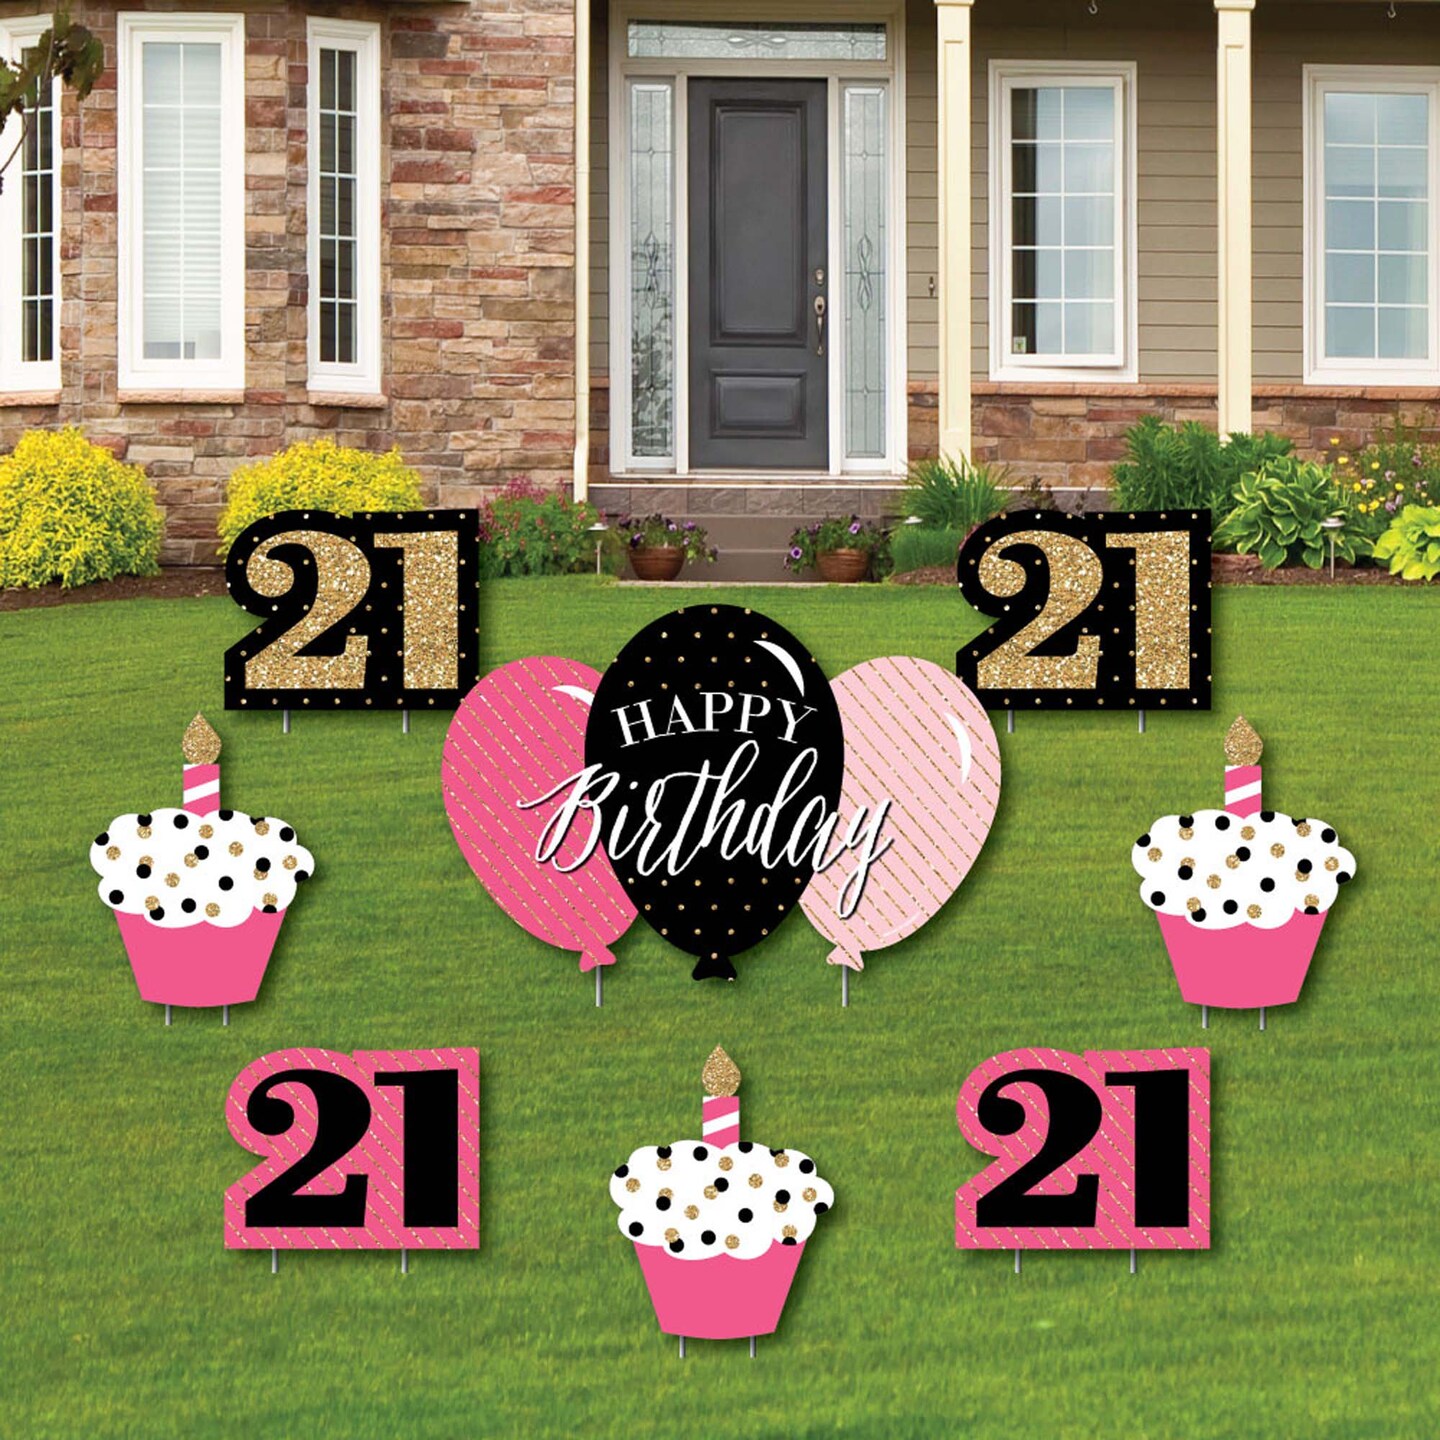 Yard Signs For 21st Birthday